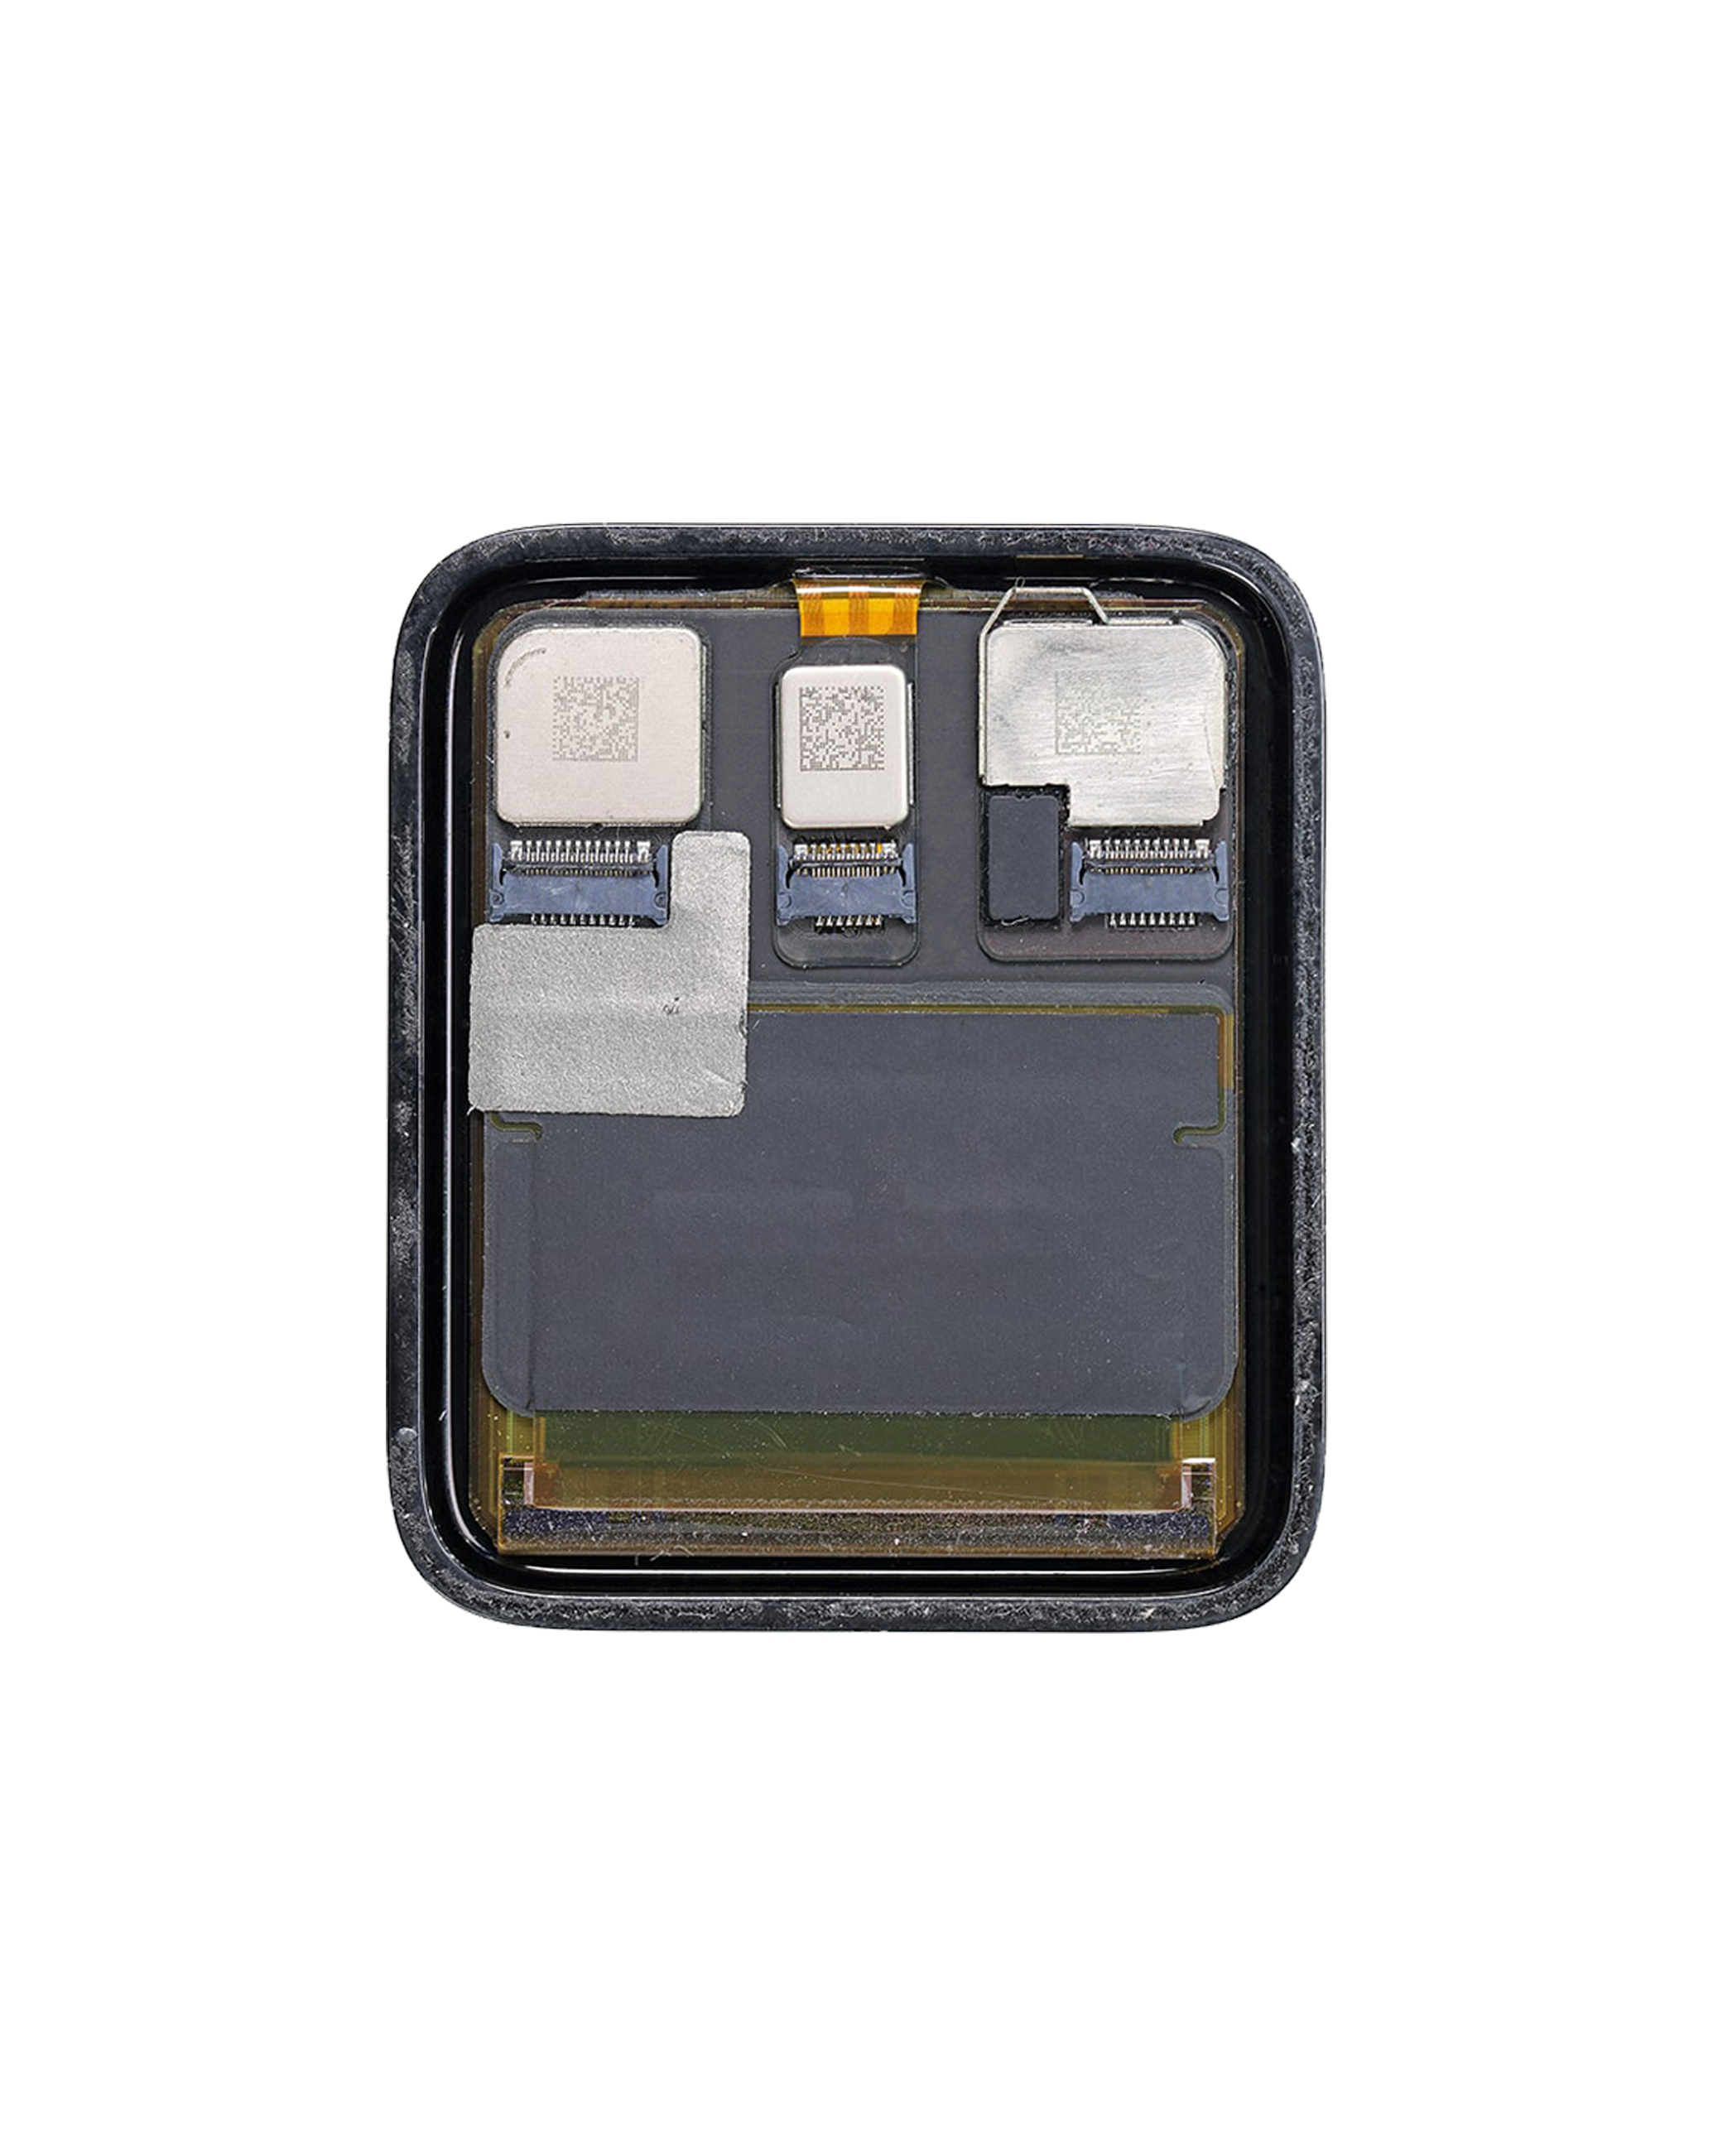 For Watch Series 3 (38MM) OLED Screen Replacement (GPS Version) (Premium)